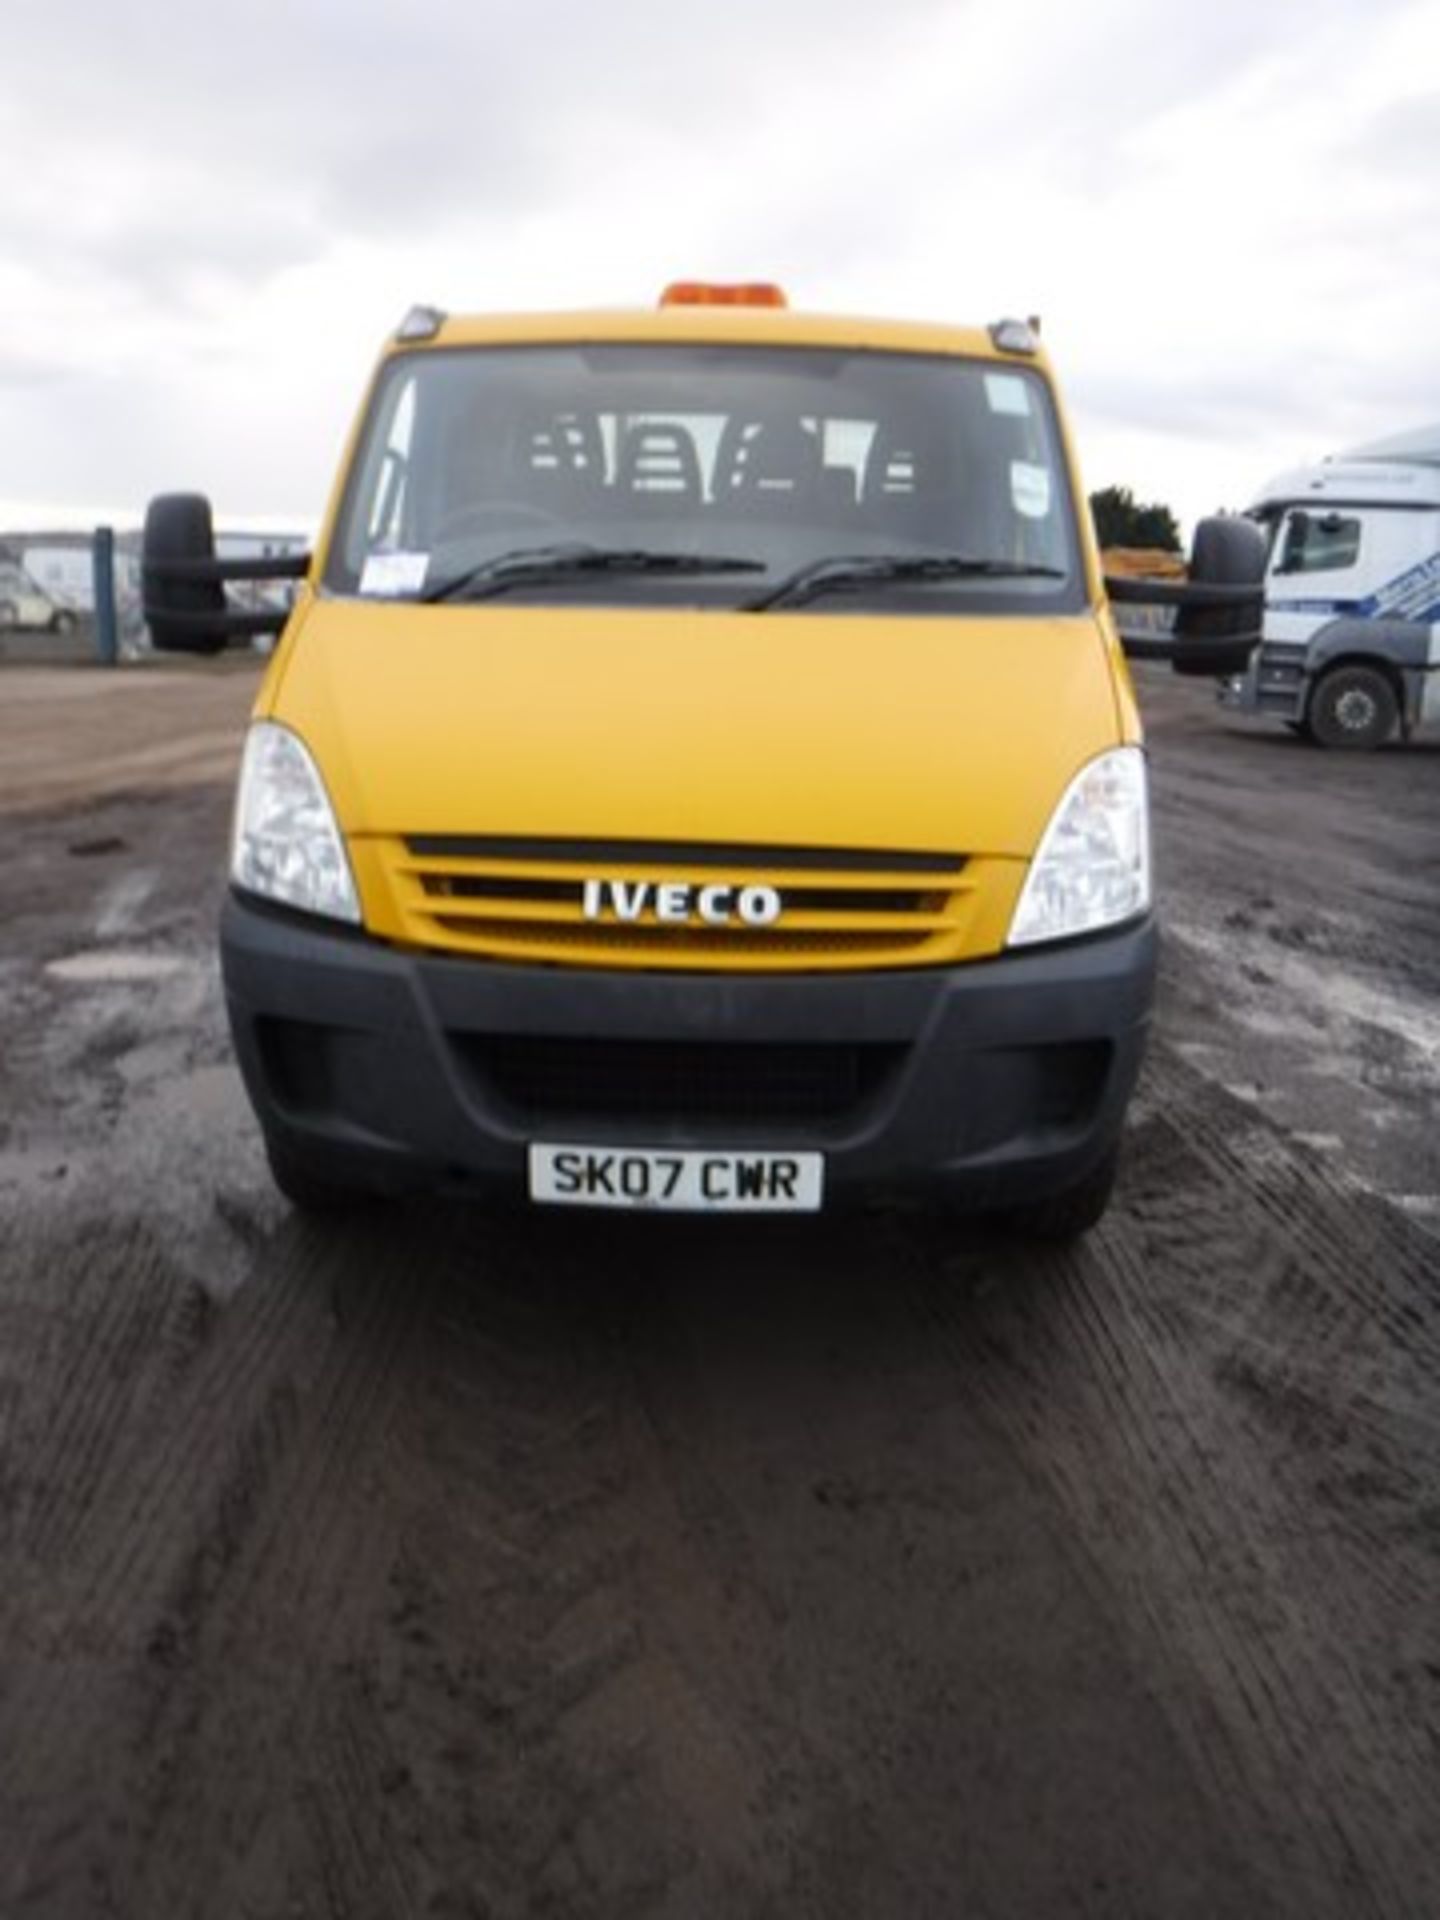 IVECO DAILY 65C18 - 2998cc - Image 2 of 11